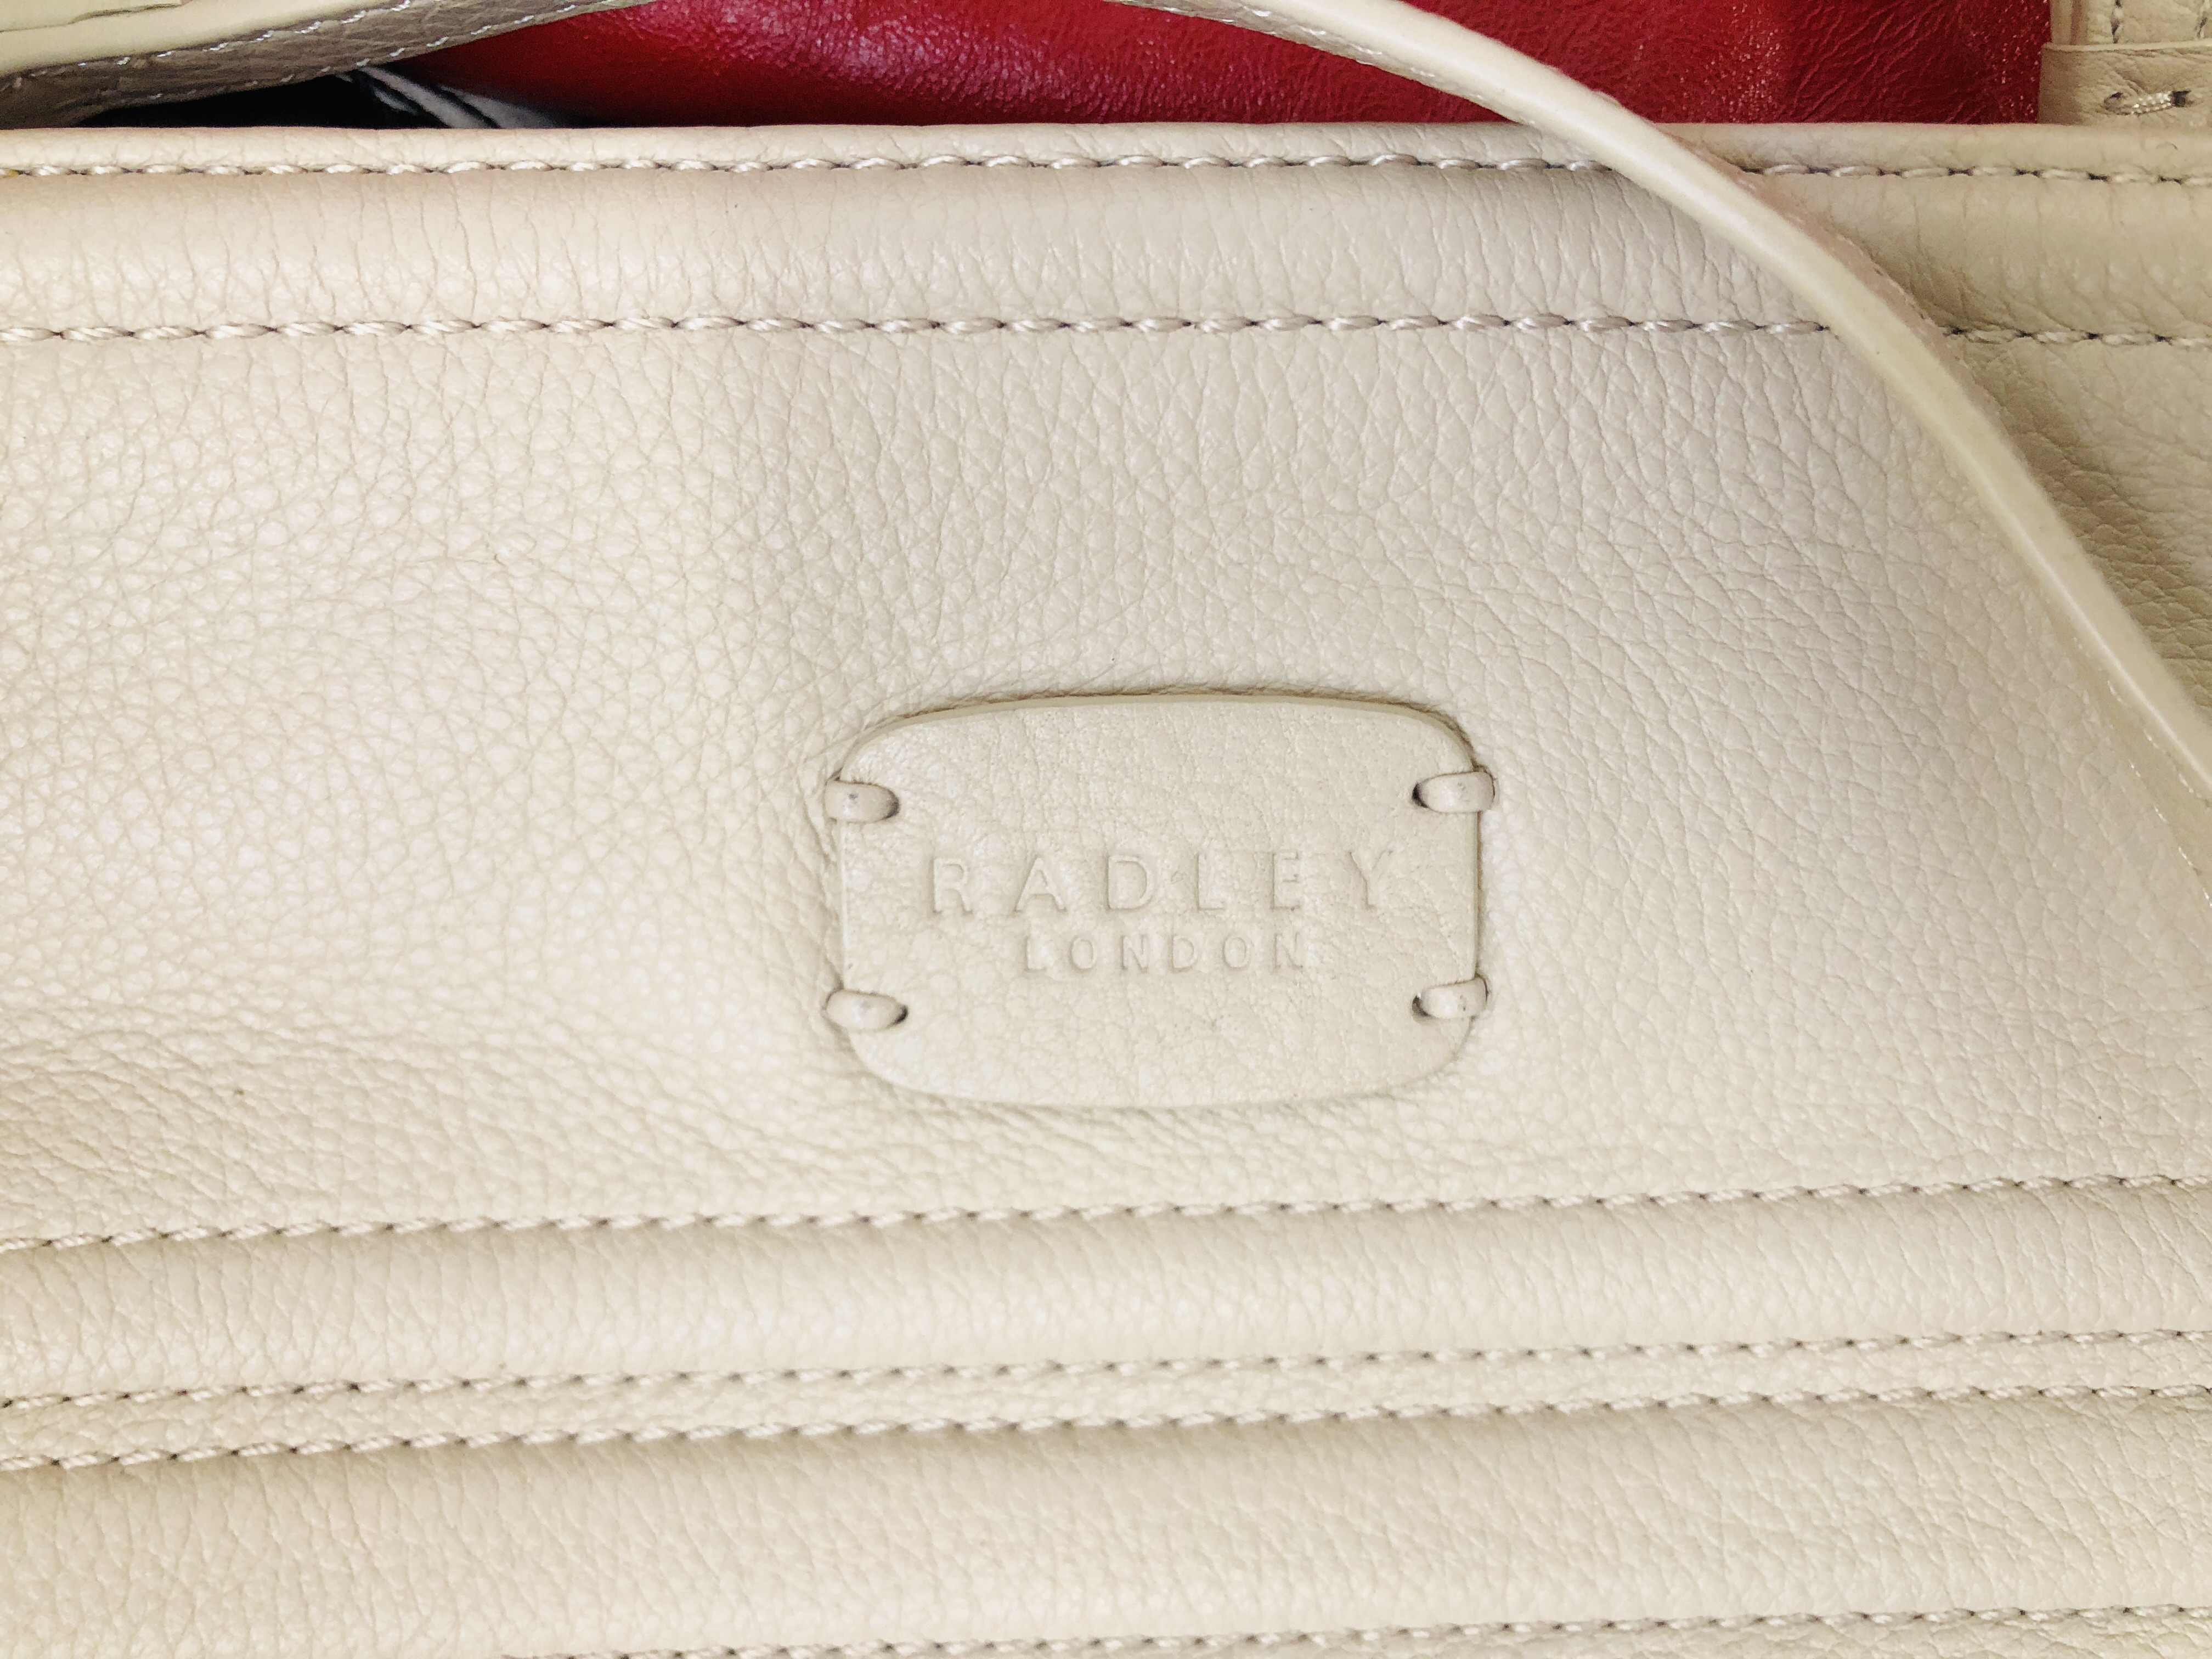 TWO BOXES OF LADIES HANDBAGS TO INCLUDE RADLEY OF LONDON ETC. - Image 4 of 4